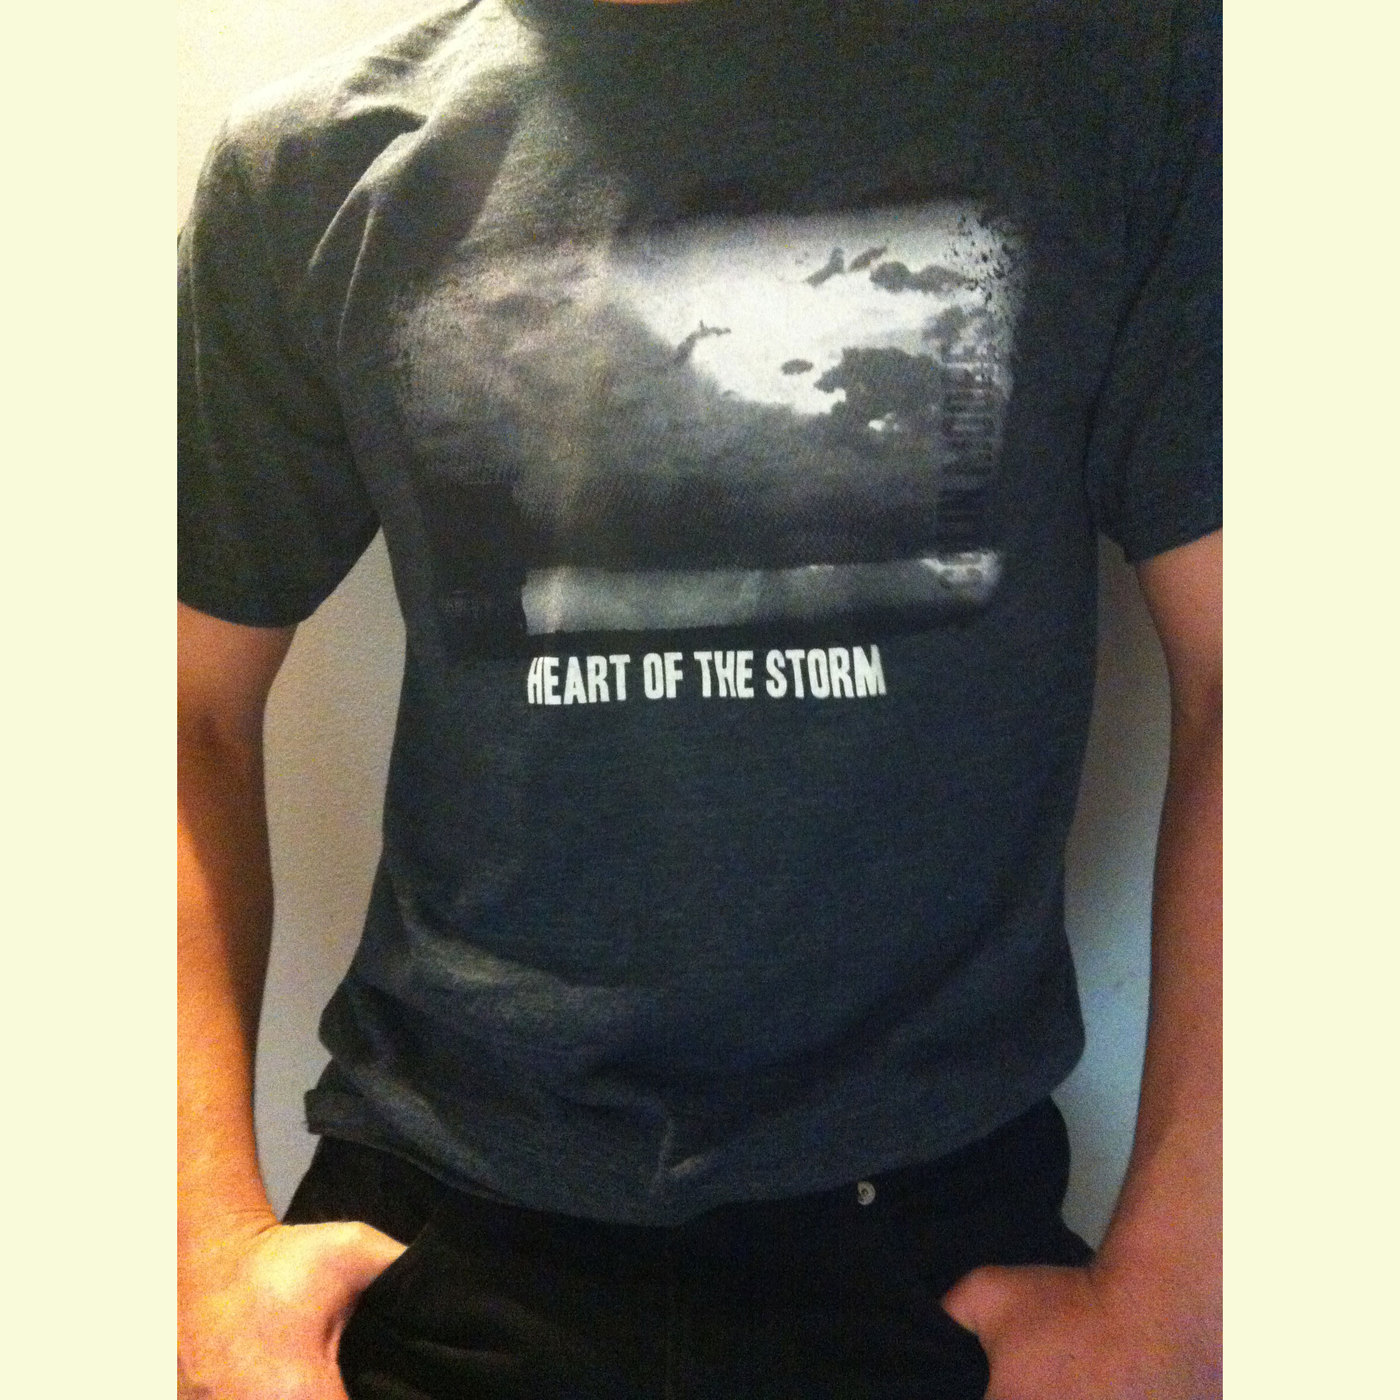 Colin Moore - Heart of the Storm Male shirt